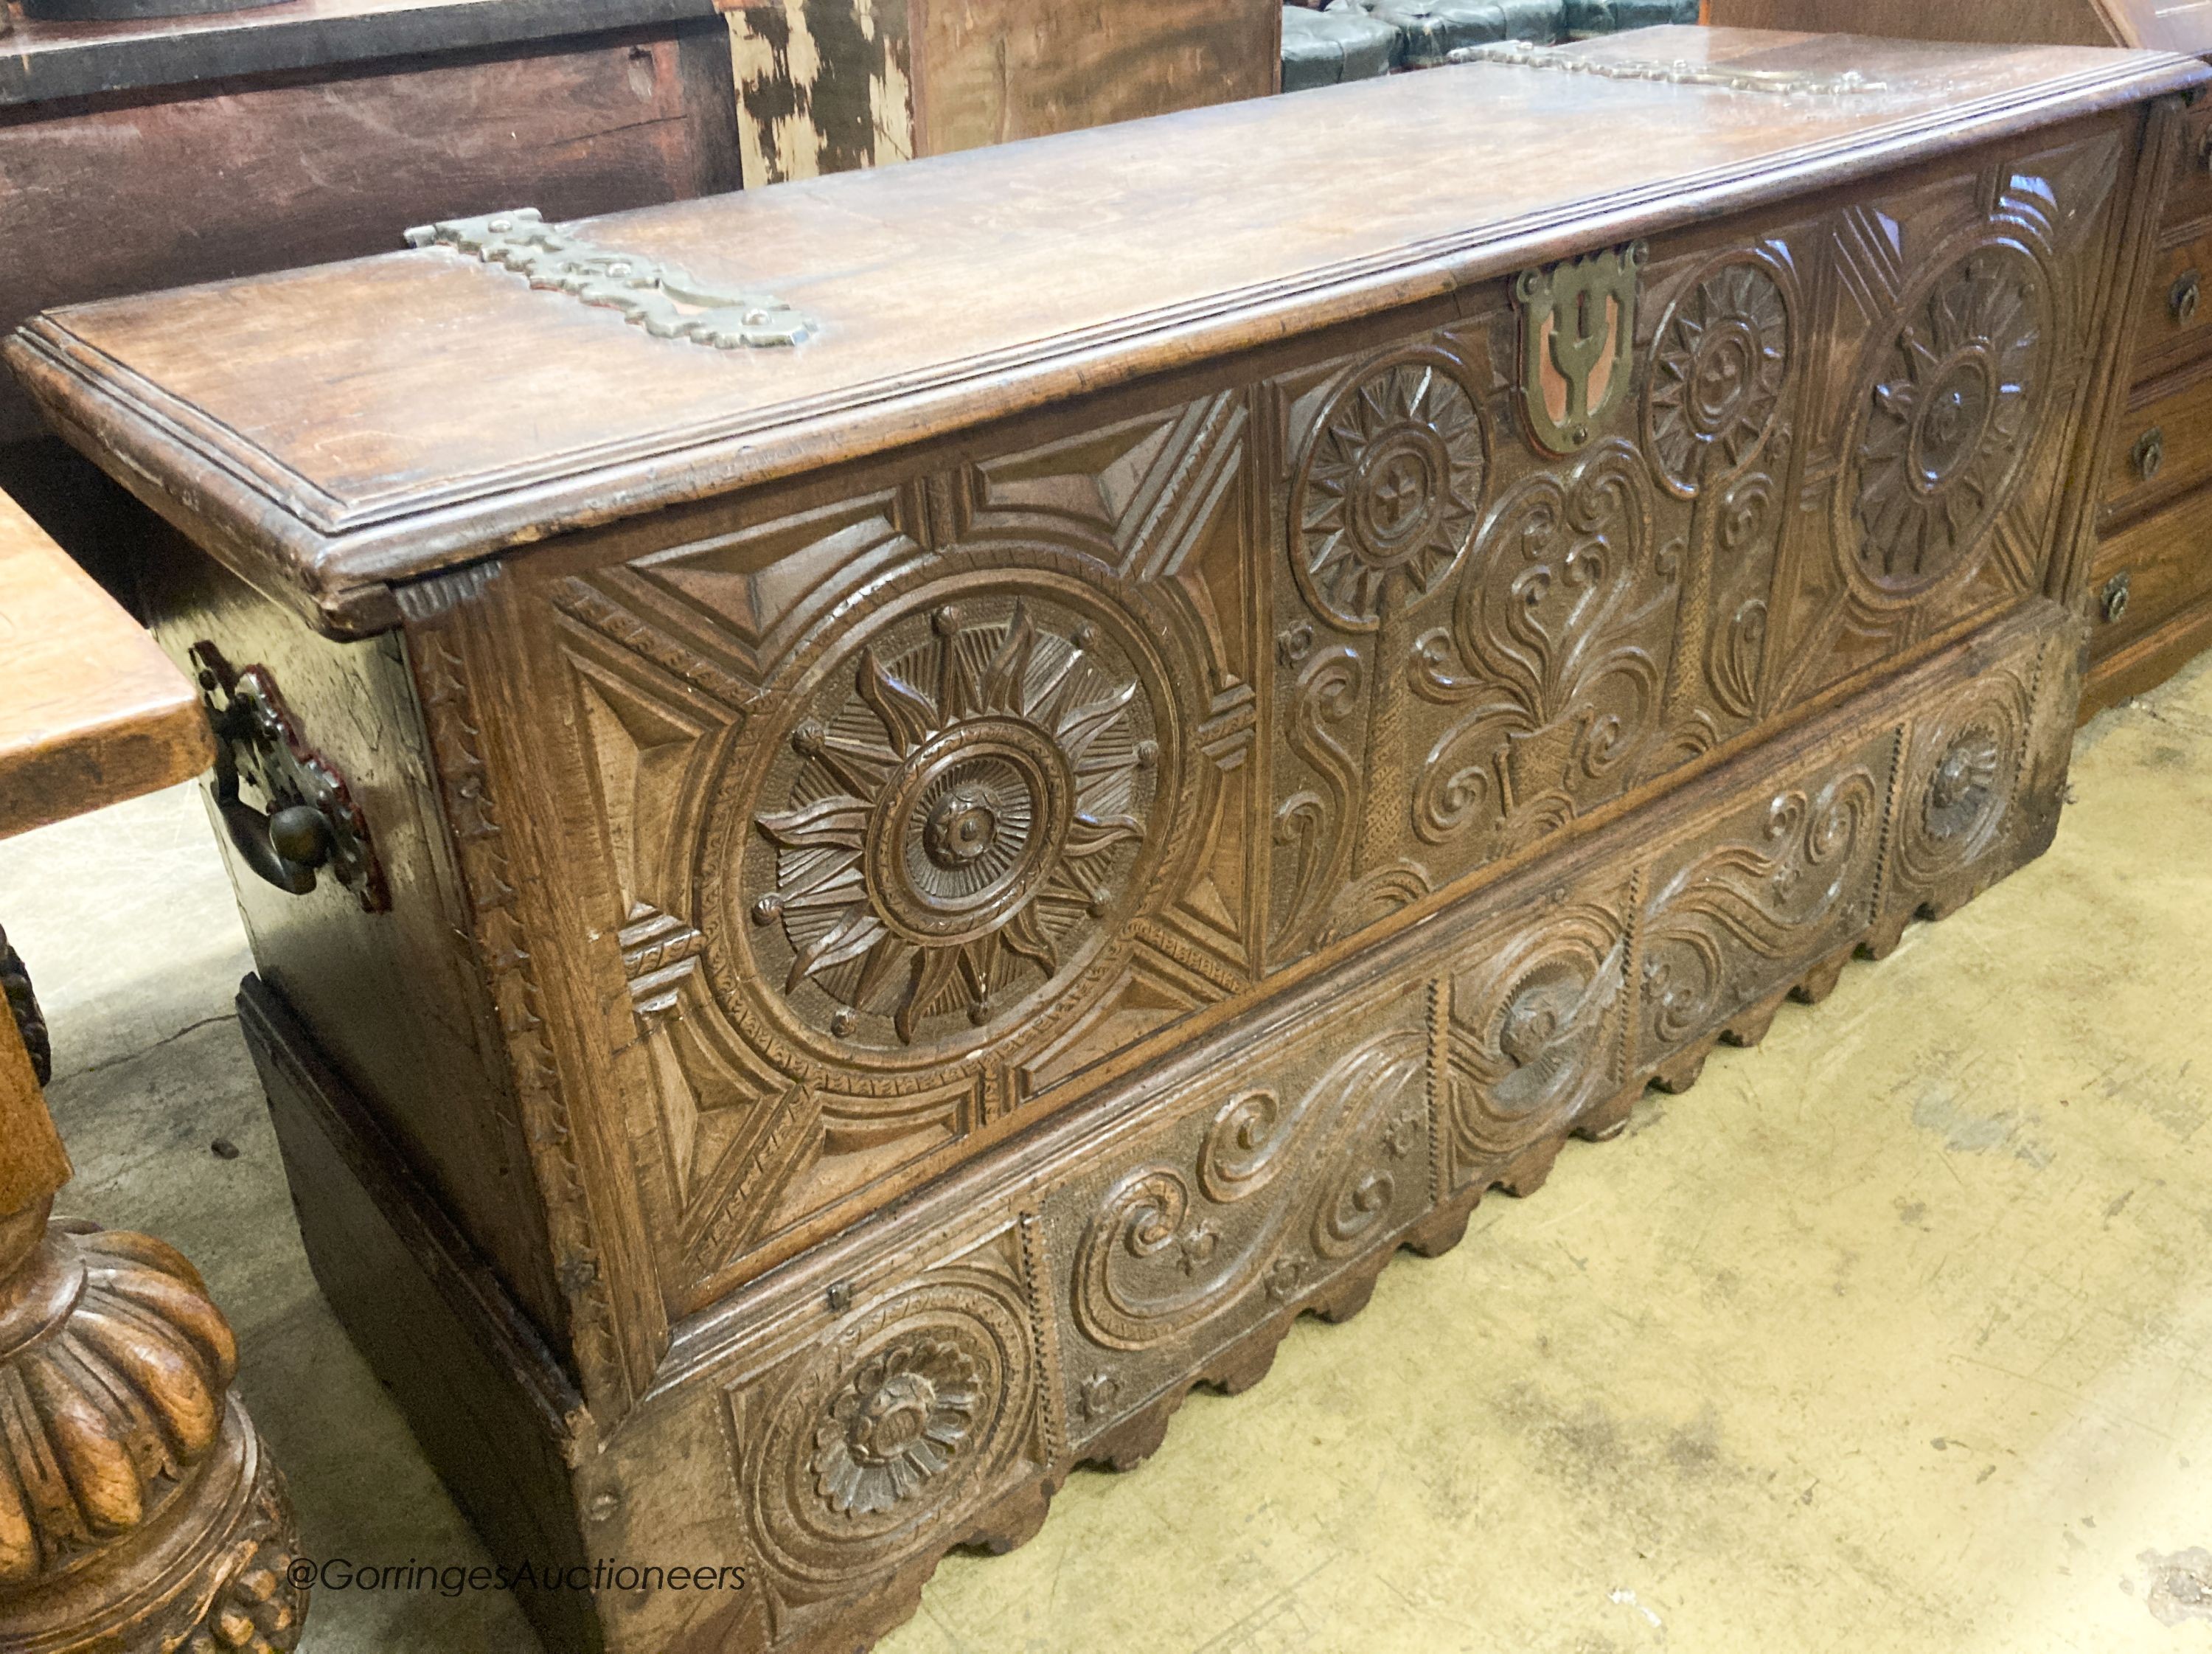 A 17th / 18th century Welsh oak coffer, with carved panelled front and heavy brass strap hinges, W.162cm D.57cm H.78cm                                                                                                      